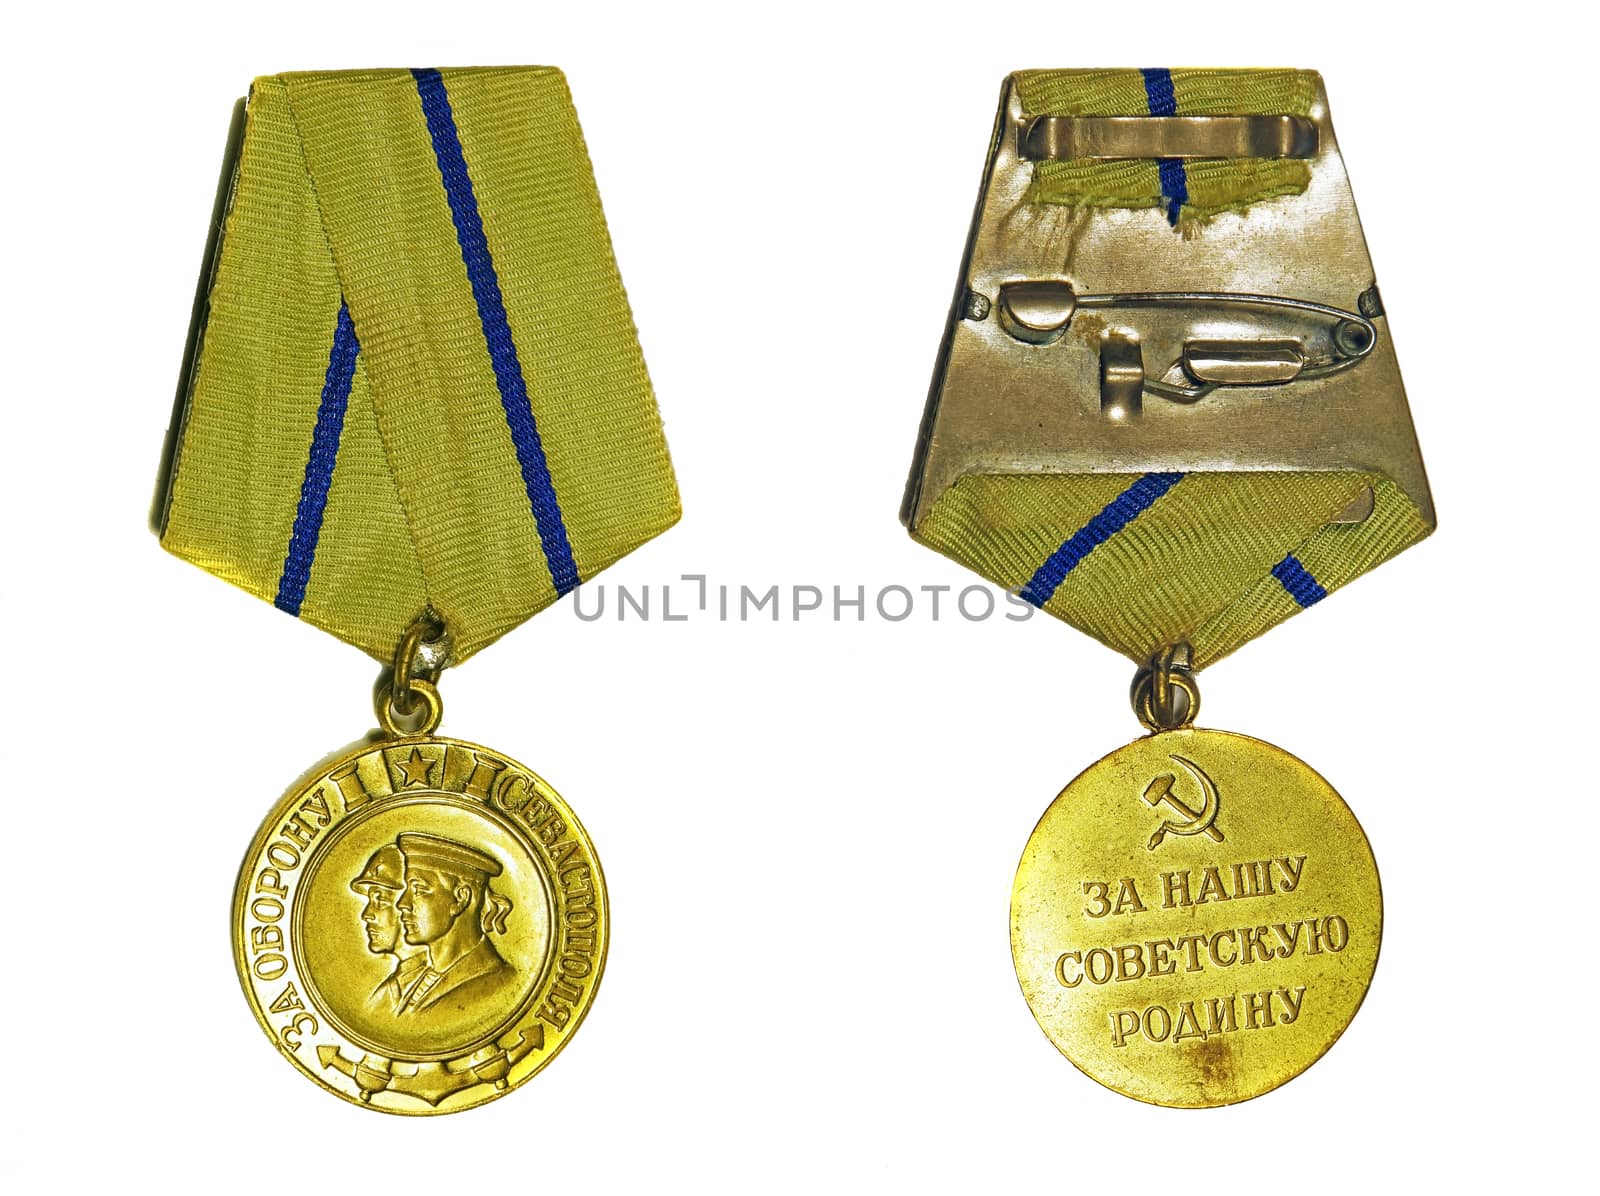 Medal "For the Defence of Sevastopol" (with the reverse side) on a white background